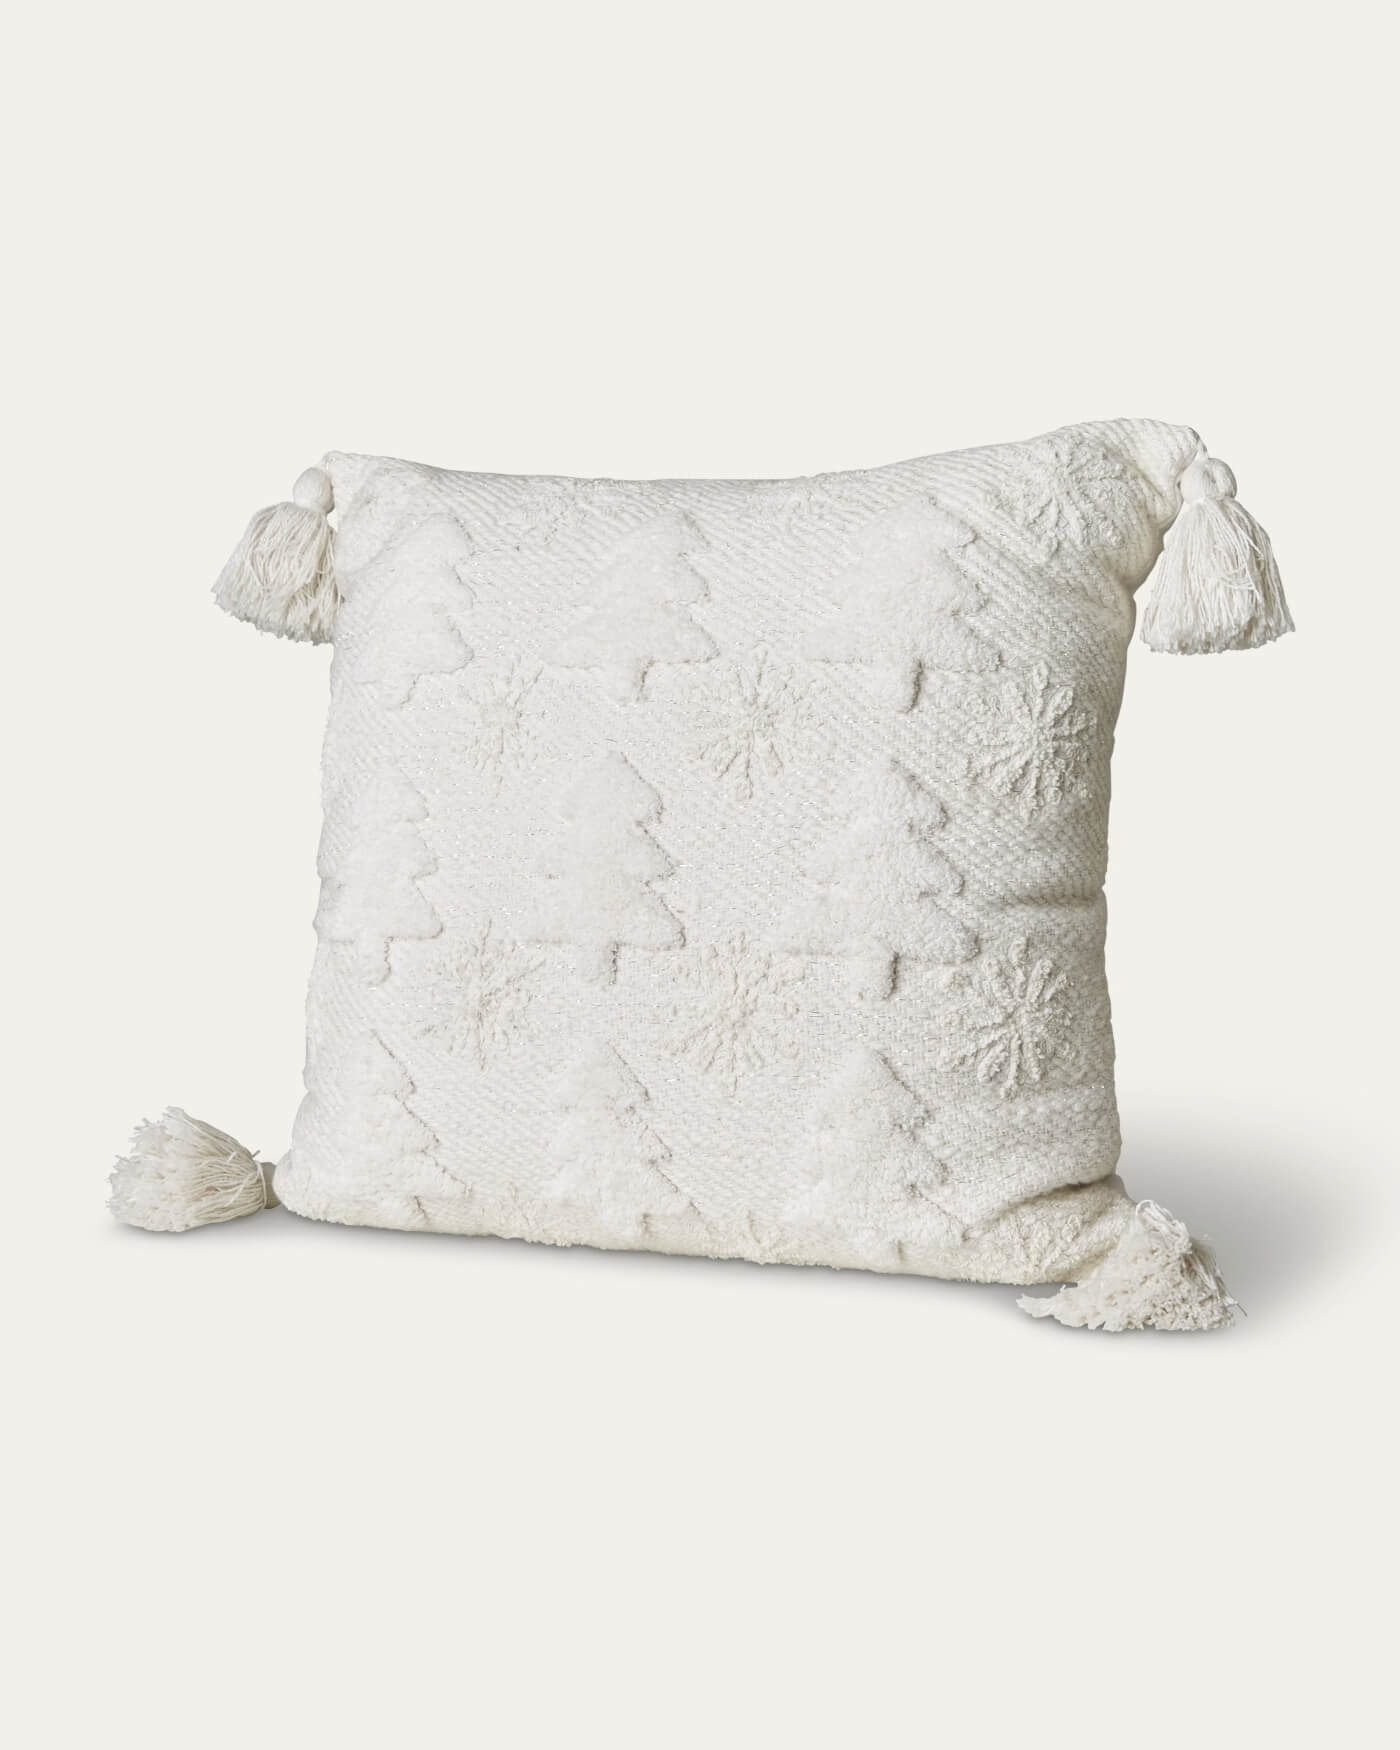 Handwoven Tufted Trees and Snowflakes Pillow | Magaschoni Home